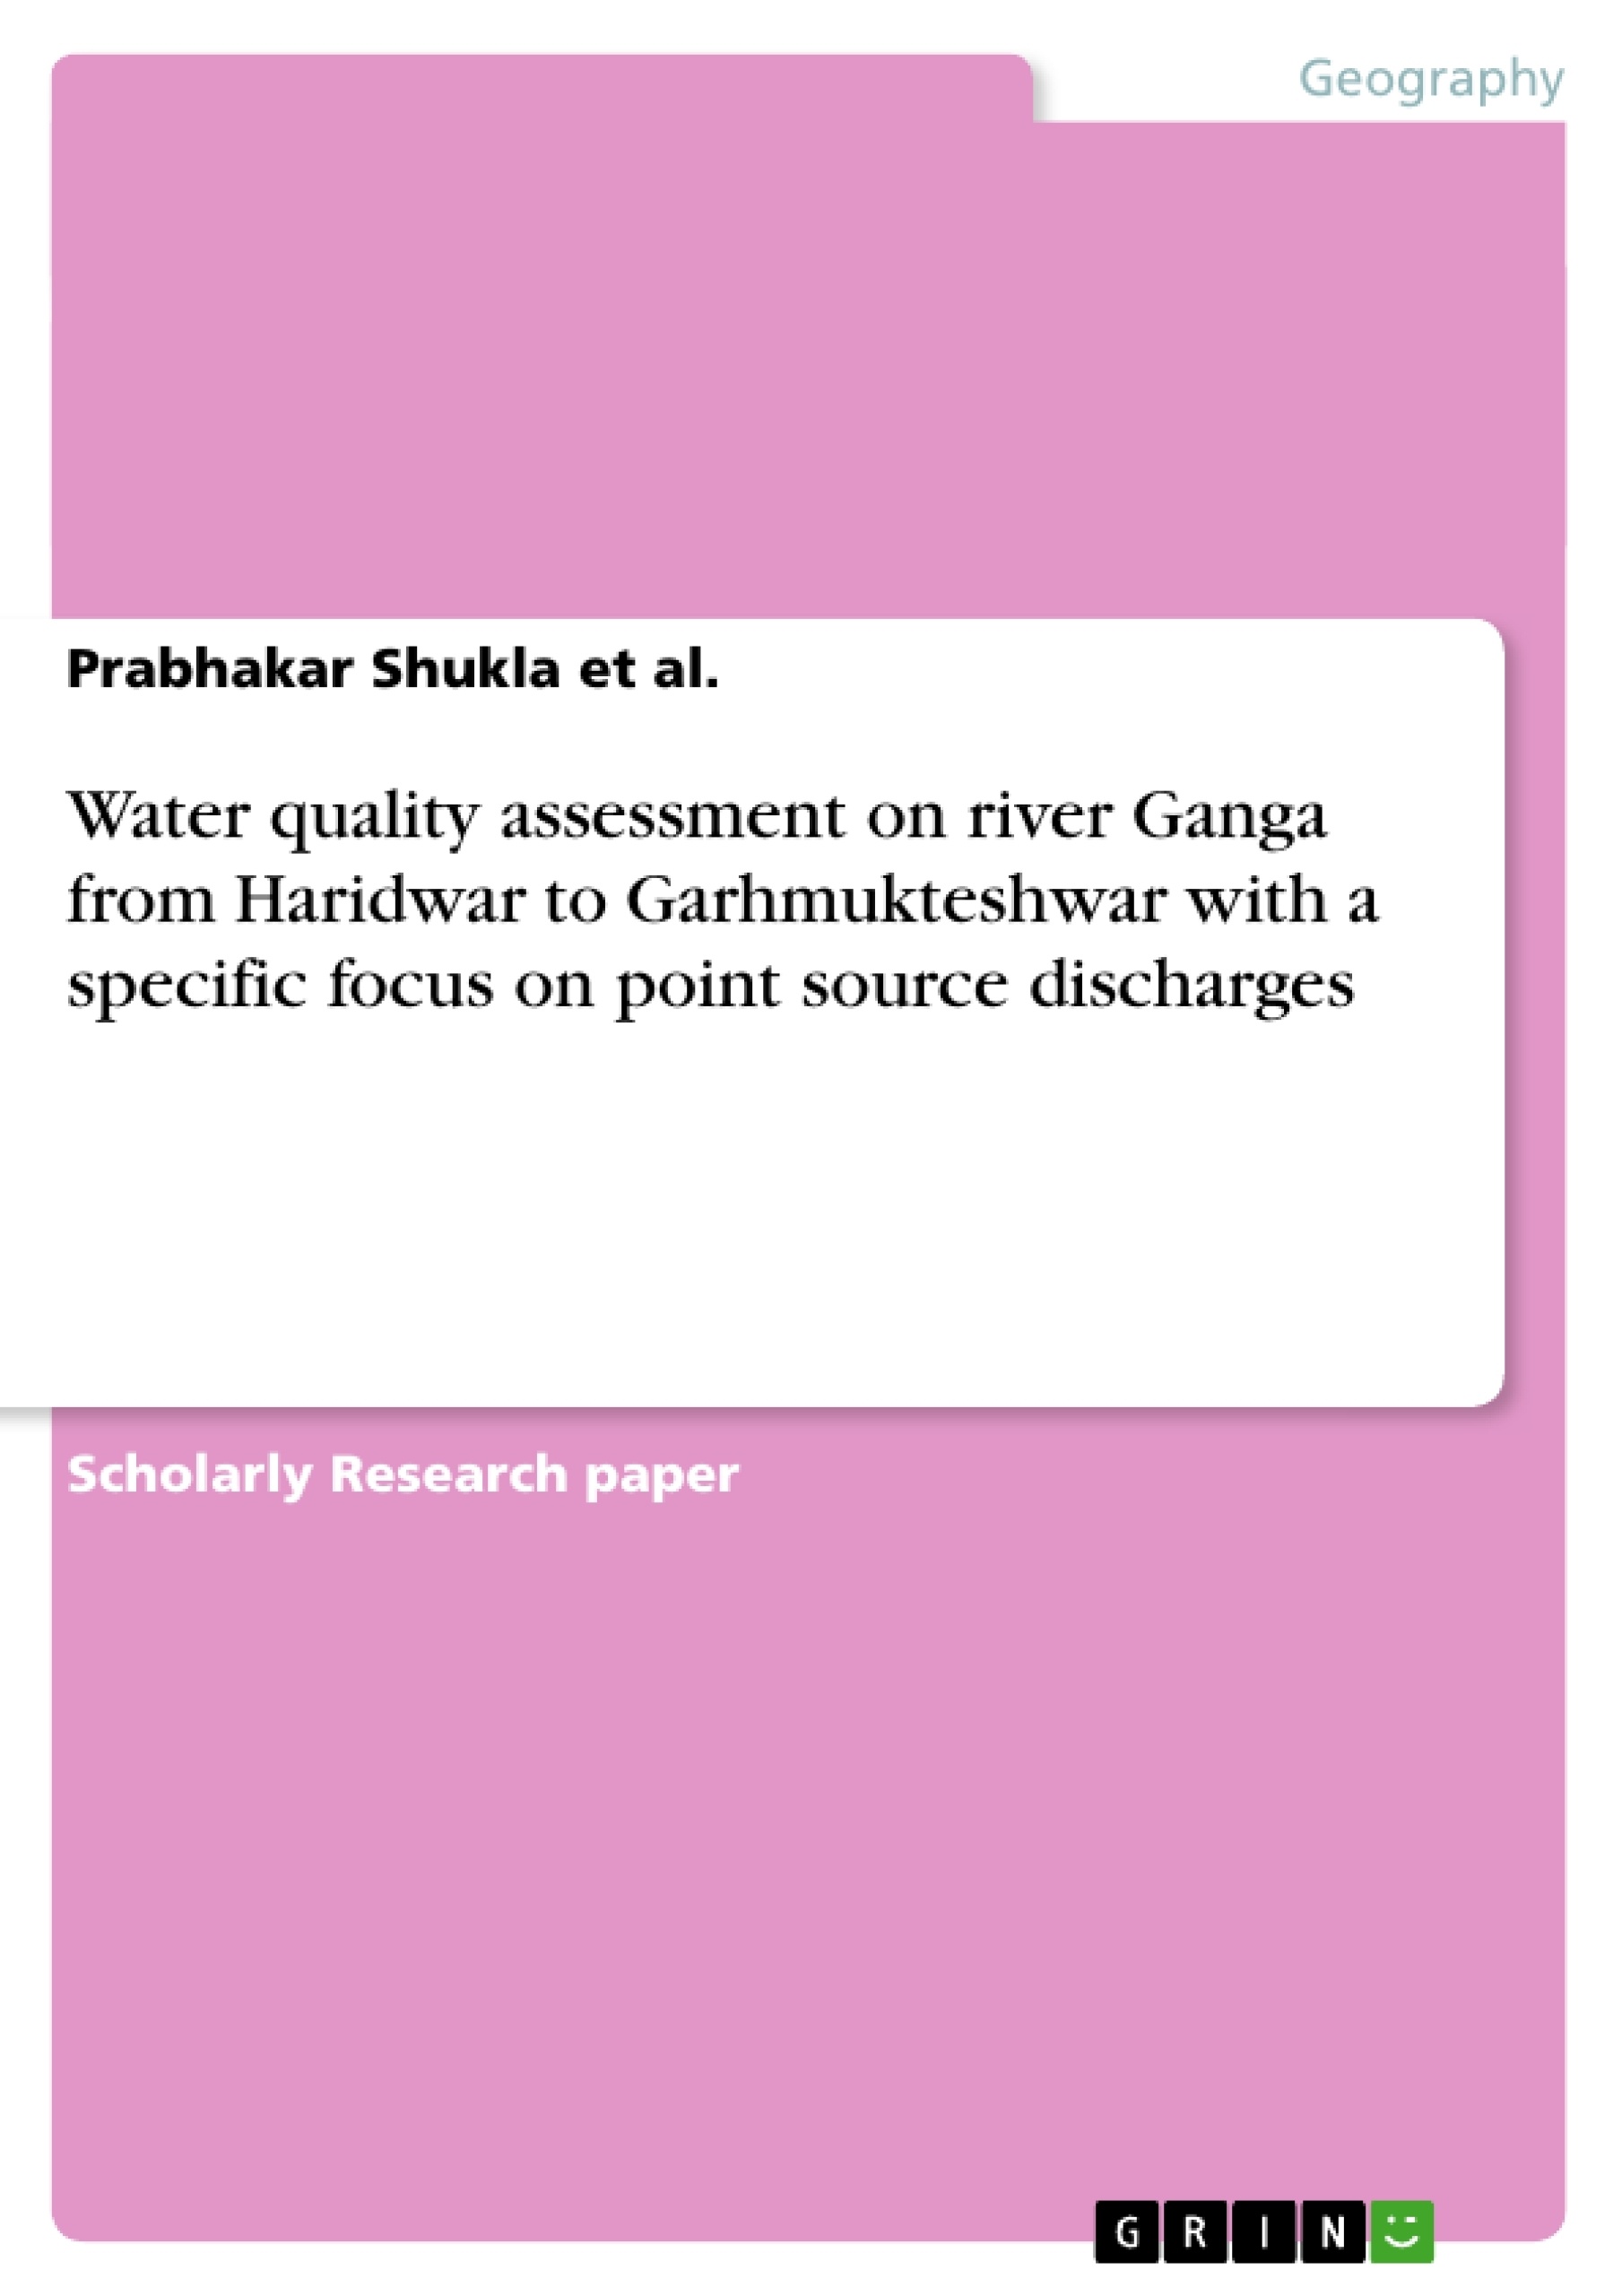 Título: Water quality assessment on river Ganga from Haridwar to Garhmukteshwar with a specific focus on point source discharges